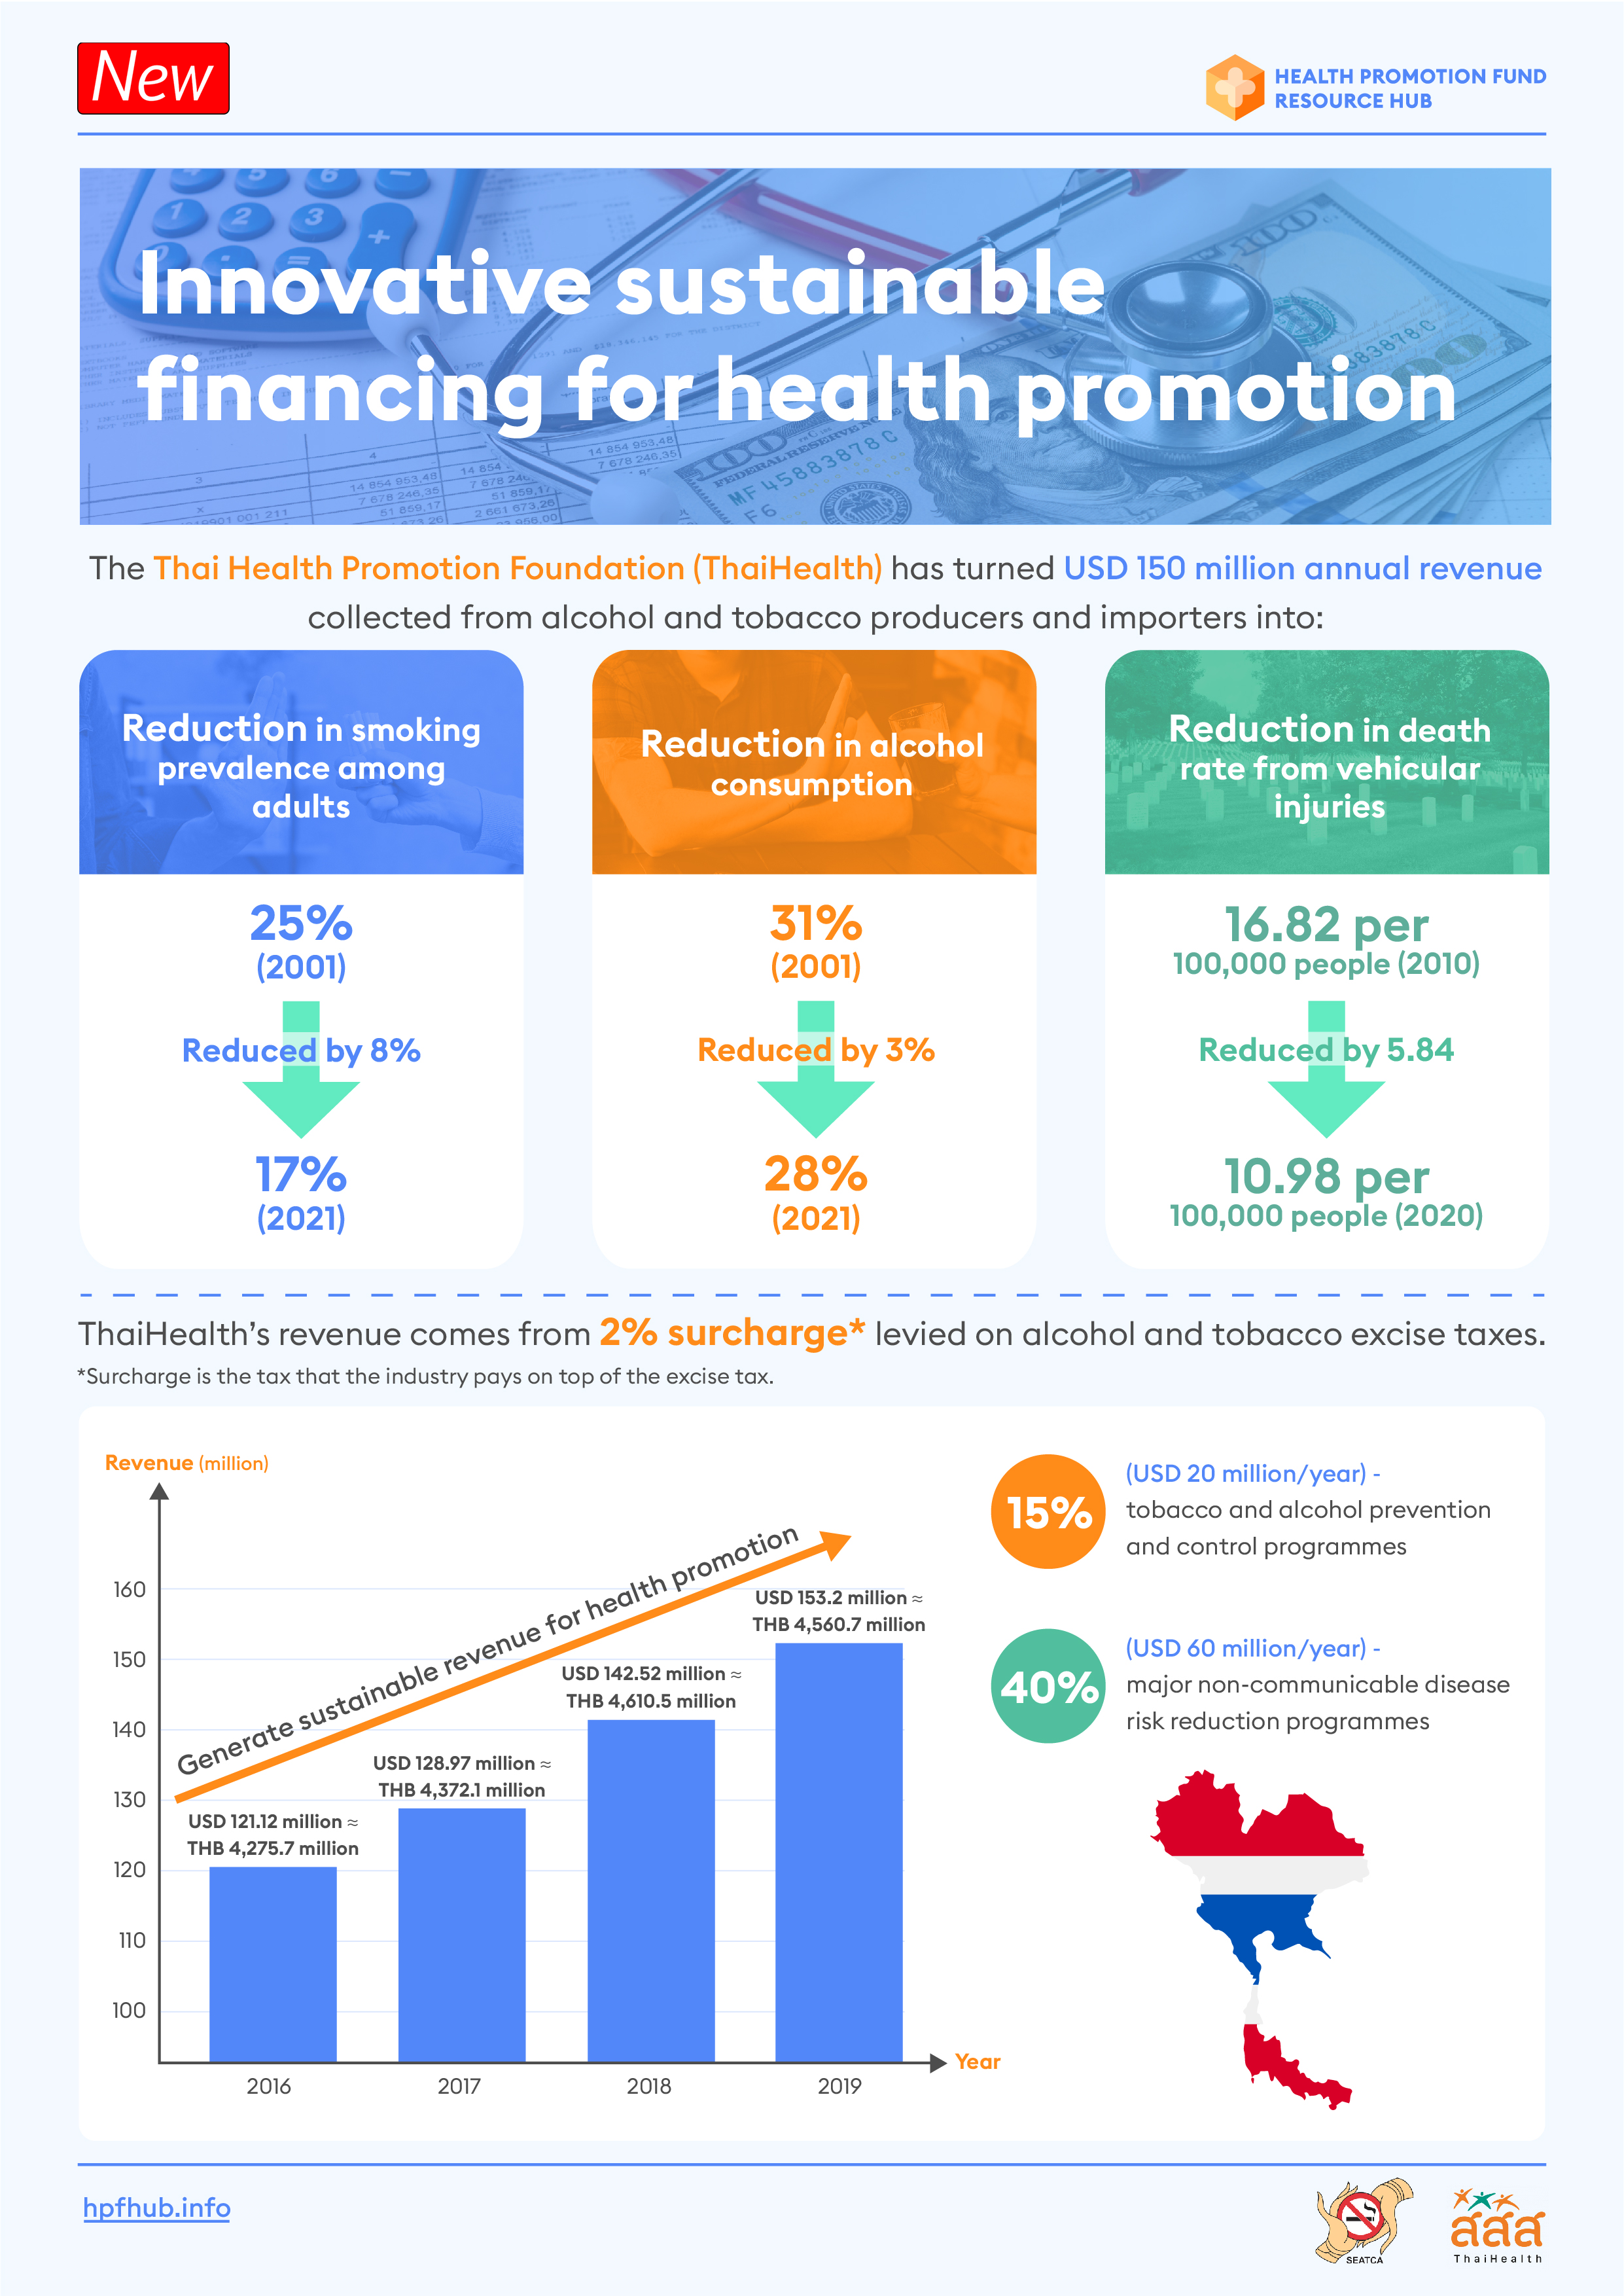 Innovative sustainable financing for health promotion